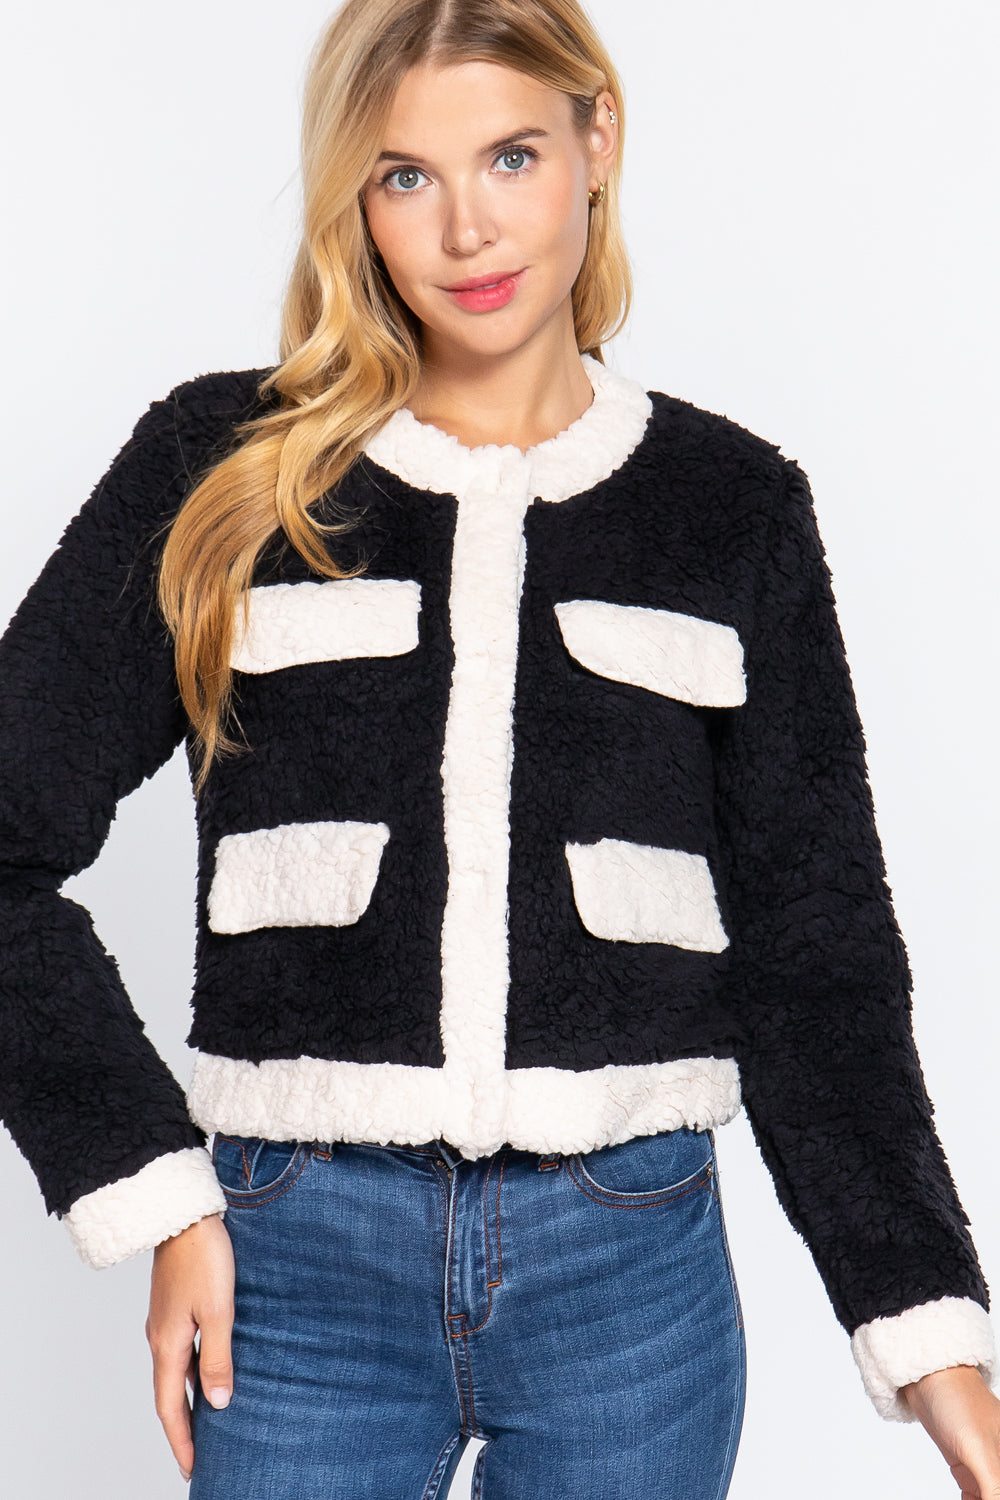 BLACK CREAM - Long Sleeve Pocket Detail Faux Fur Jacket - 3 colors - Ships from The US - womens jacket at TFC&H Co.